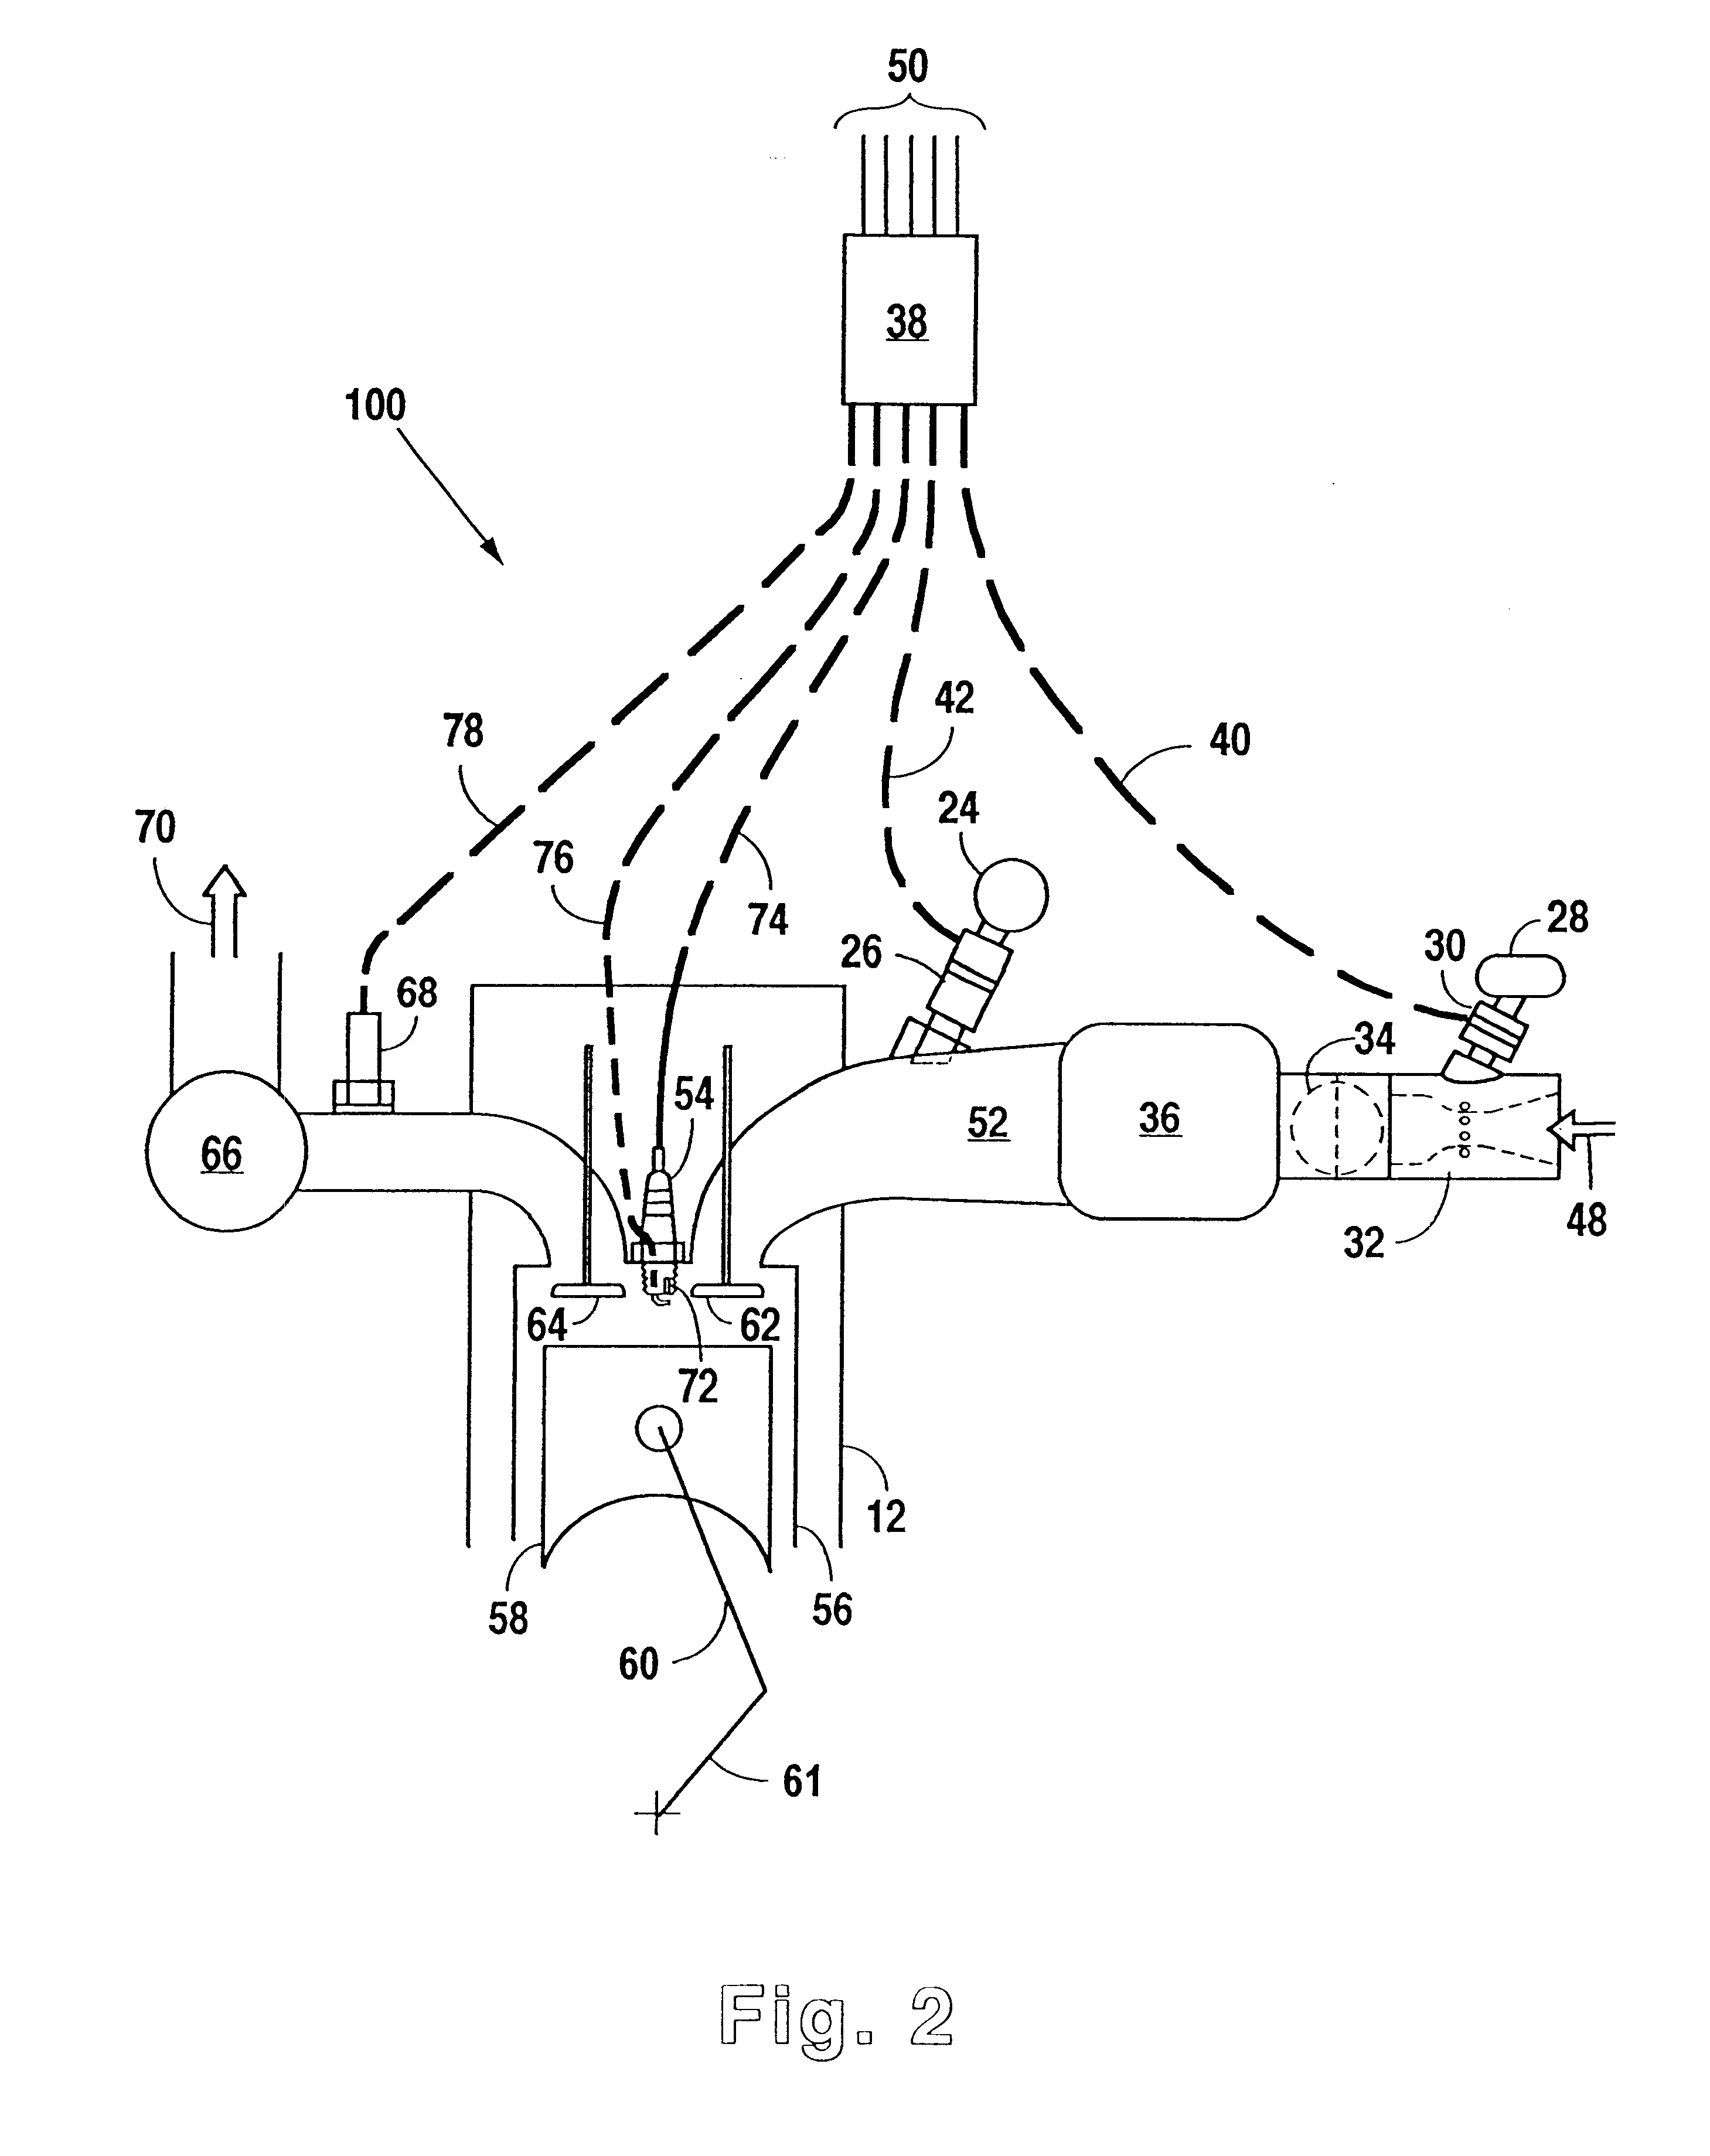 Fuel system with dual fuel injectors for internal combustion engines